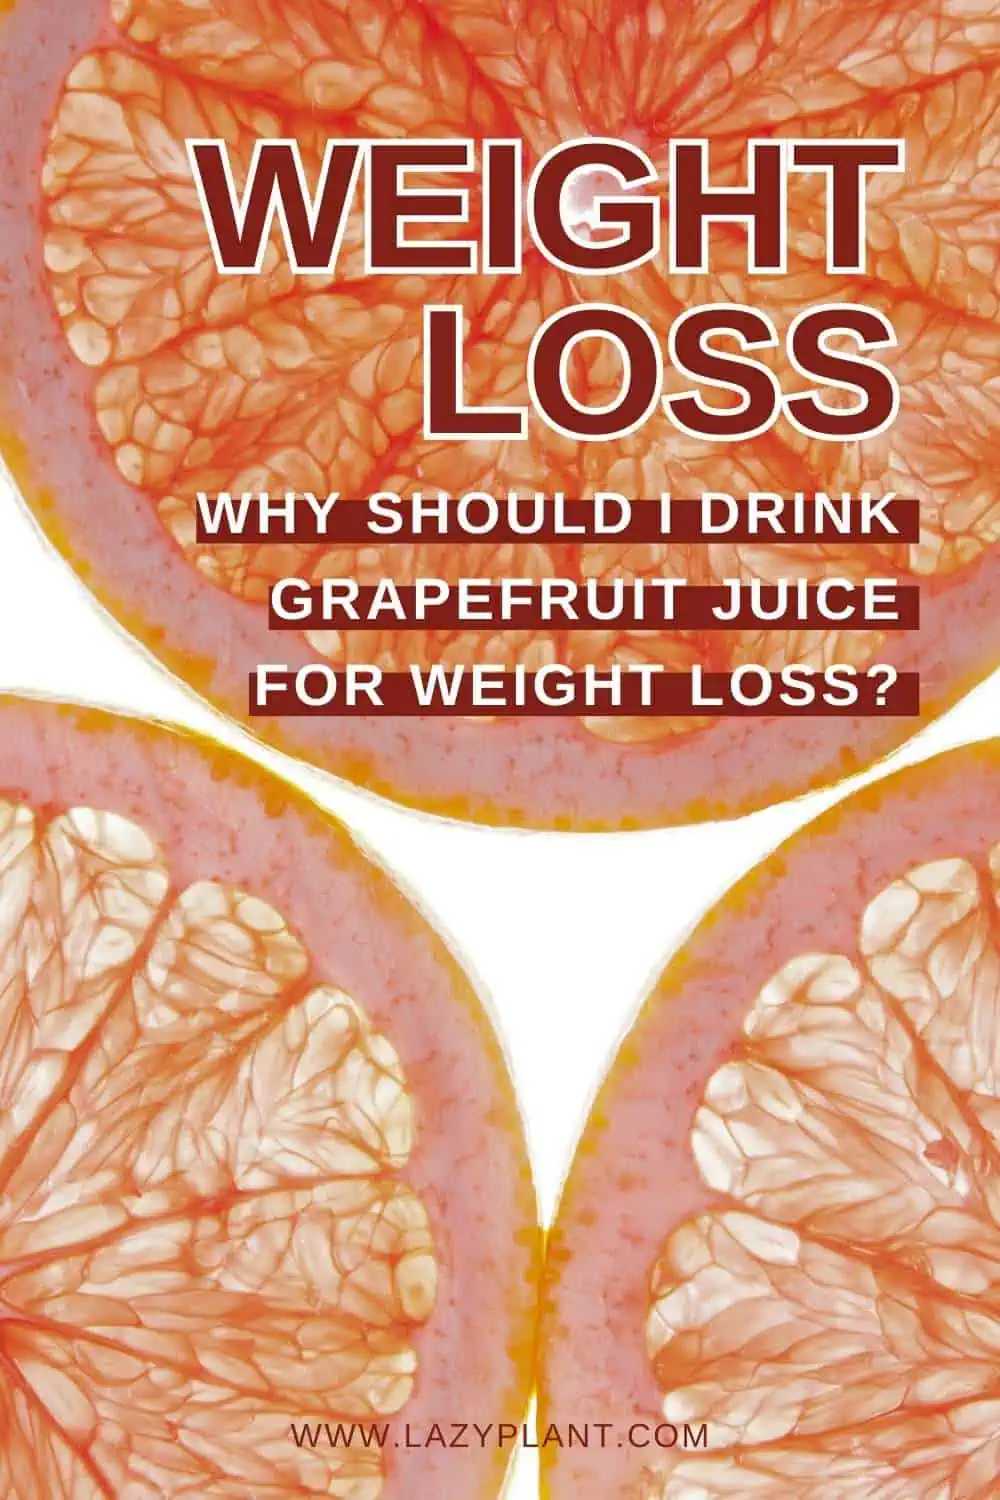 When can I drink grapefruit juice for weight loss?